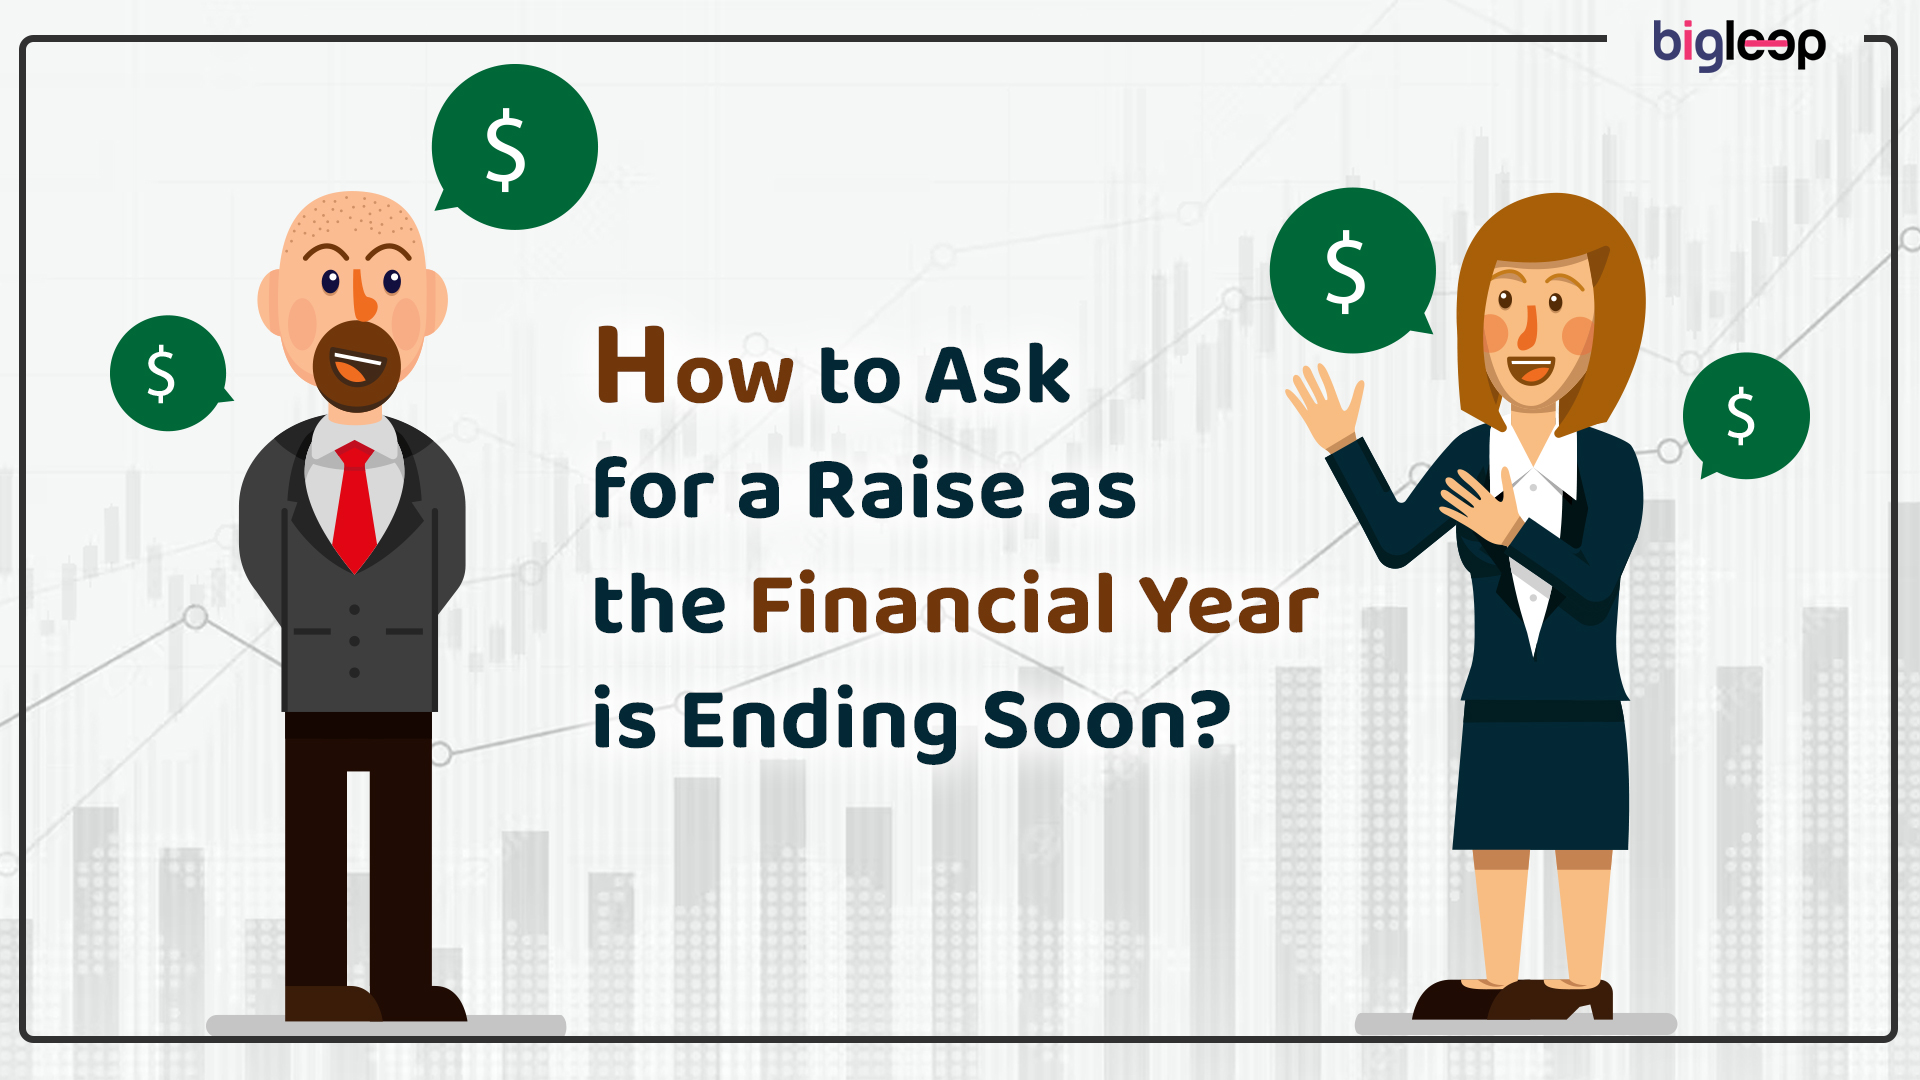 How to Ask for a Raise as the Financial Year is Ending Soon?